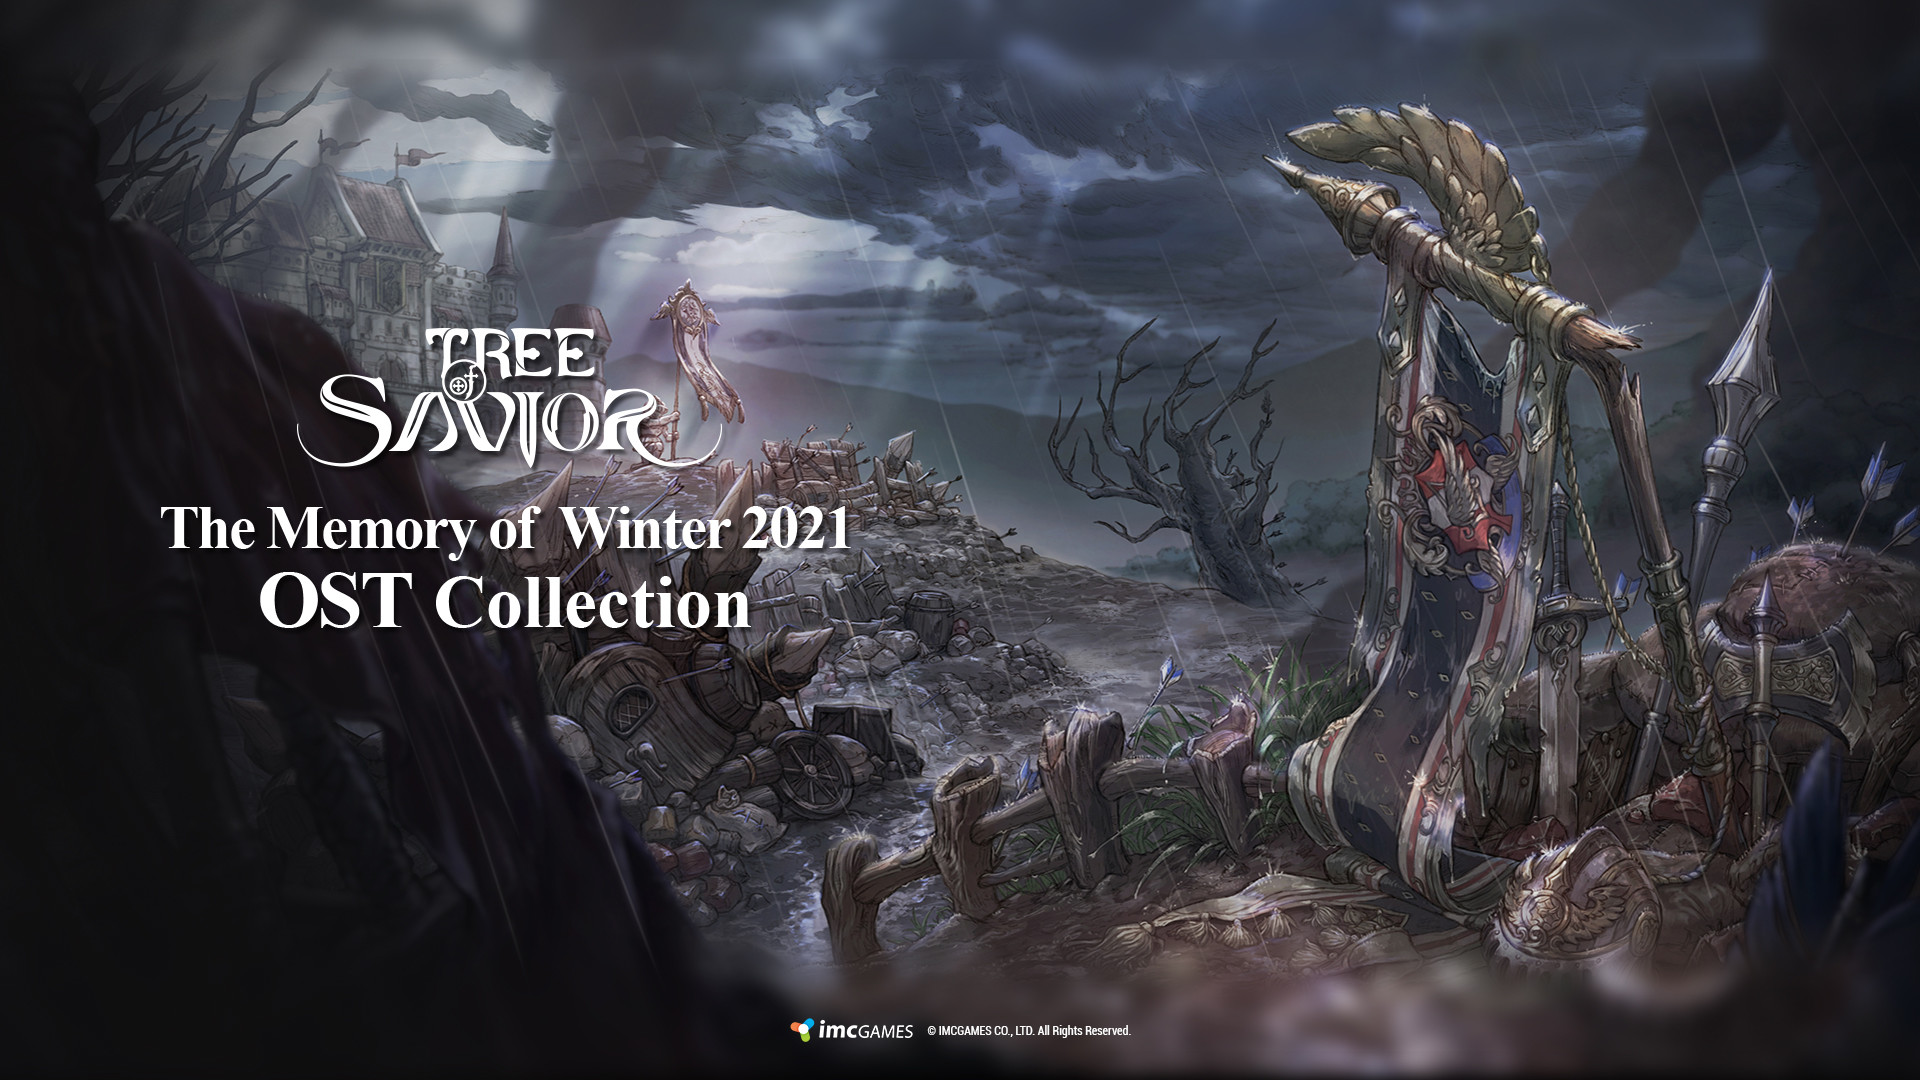 Tree of Savior - The Memory of Winter  2021 OST Collection Featured Screenshot #1